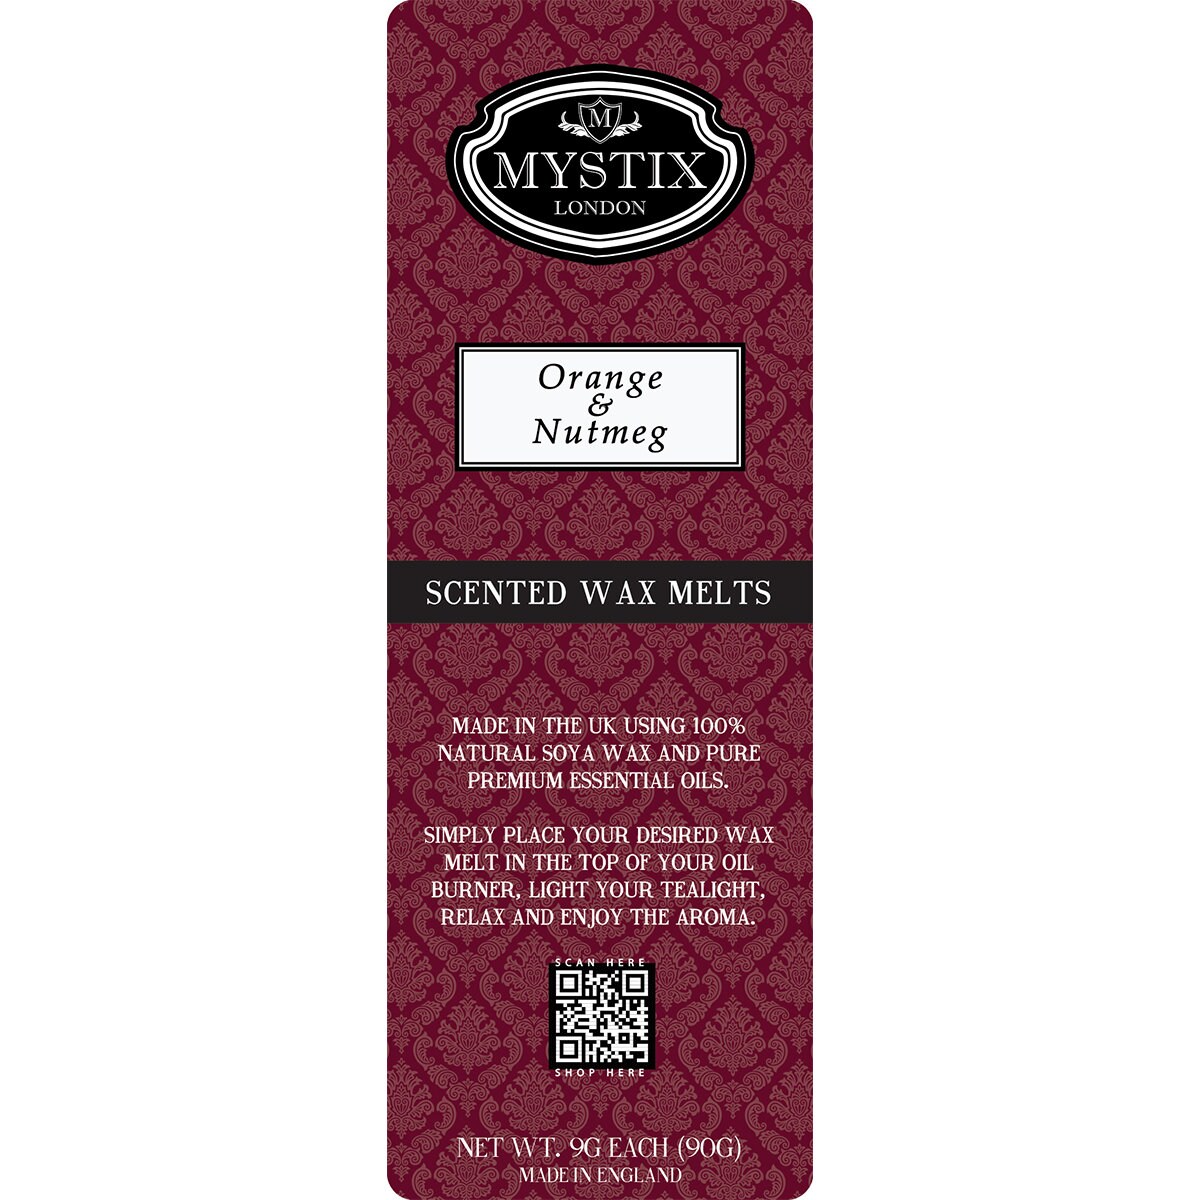 Nutmeg & Spice Scented Wax Melt – Girlfriends' Candle Co.